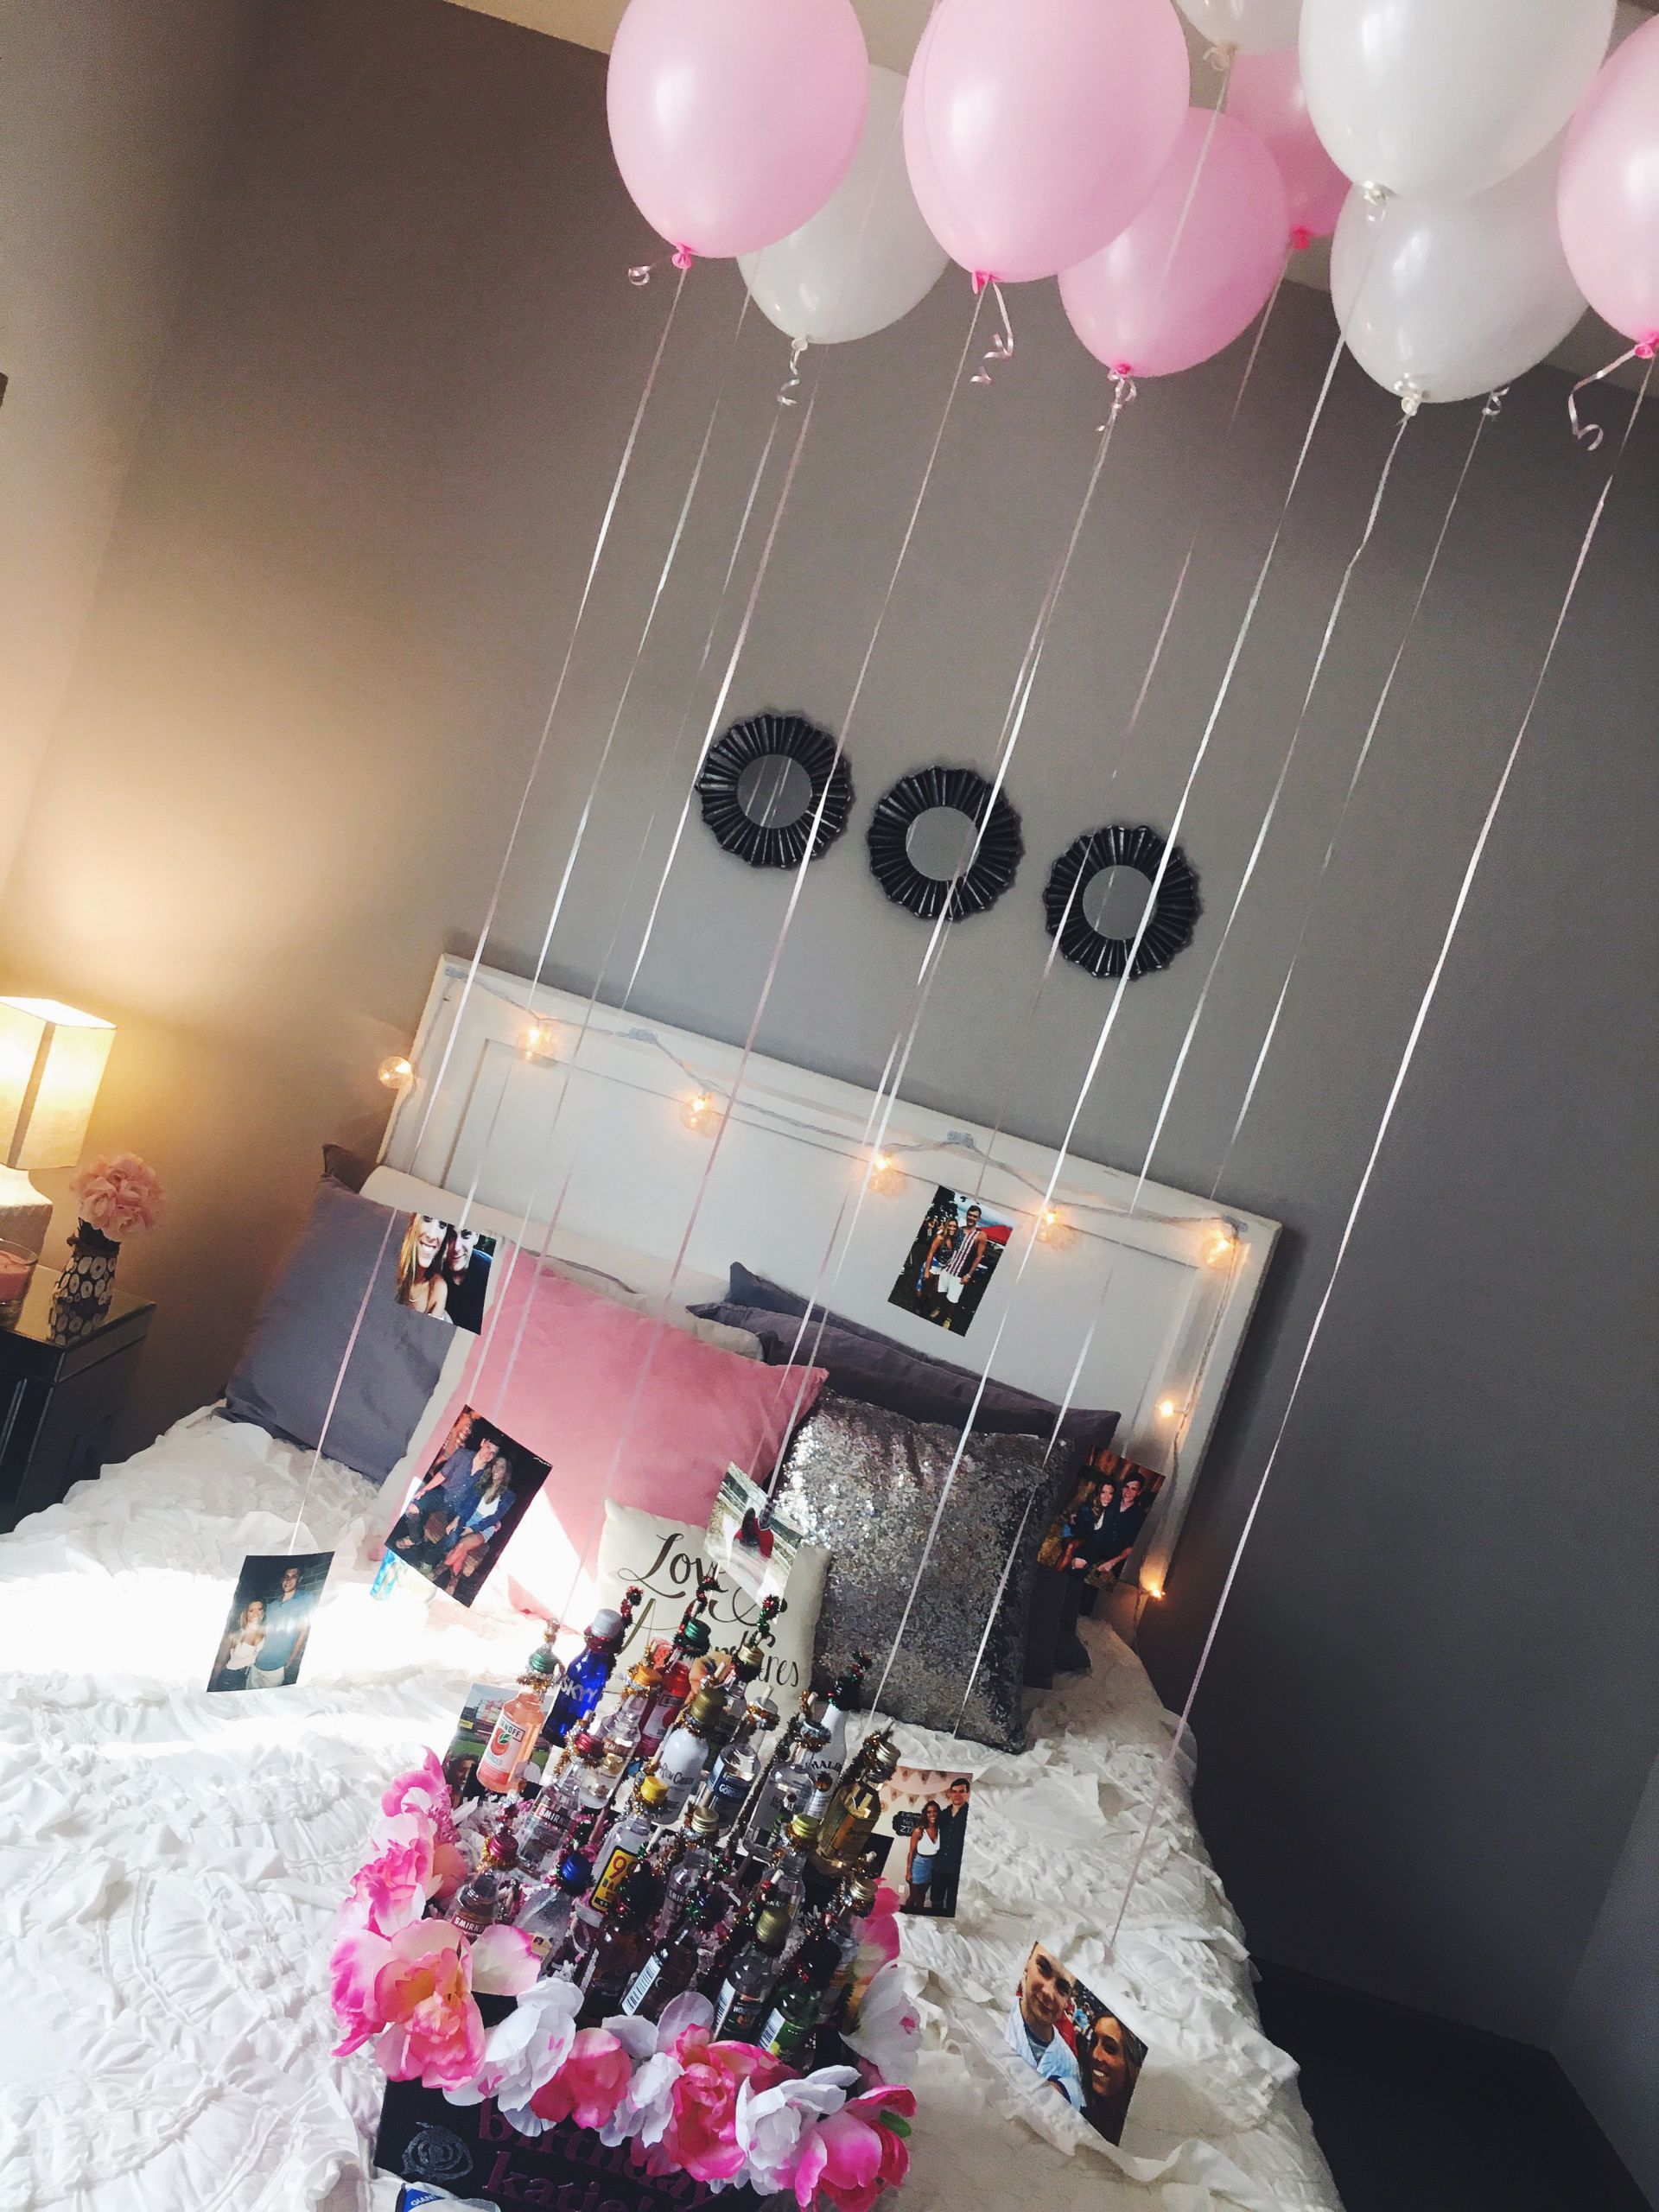 Best Birthday Gift Ideas For Girlfriend
 easy and cute decorations for a friend or girlfriends 21st